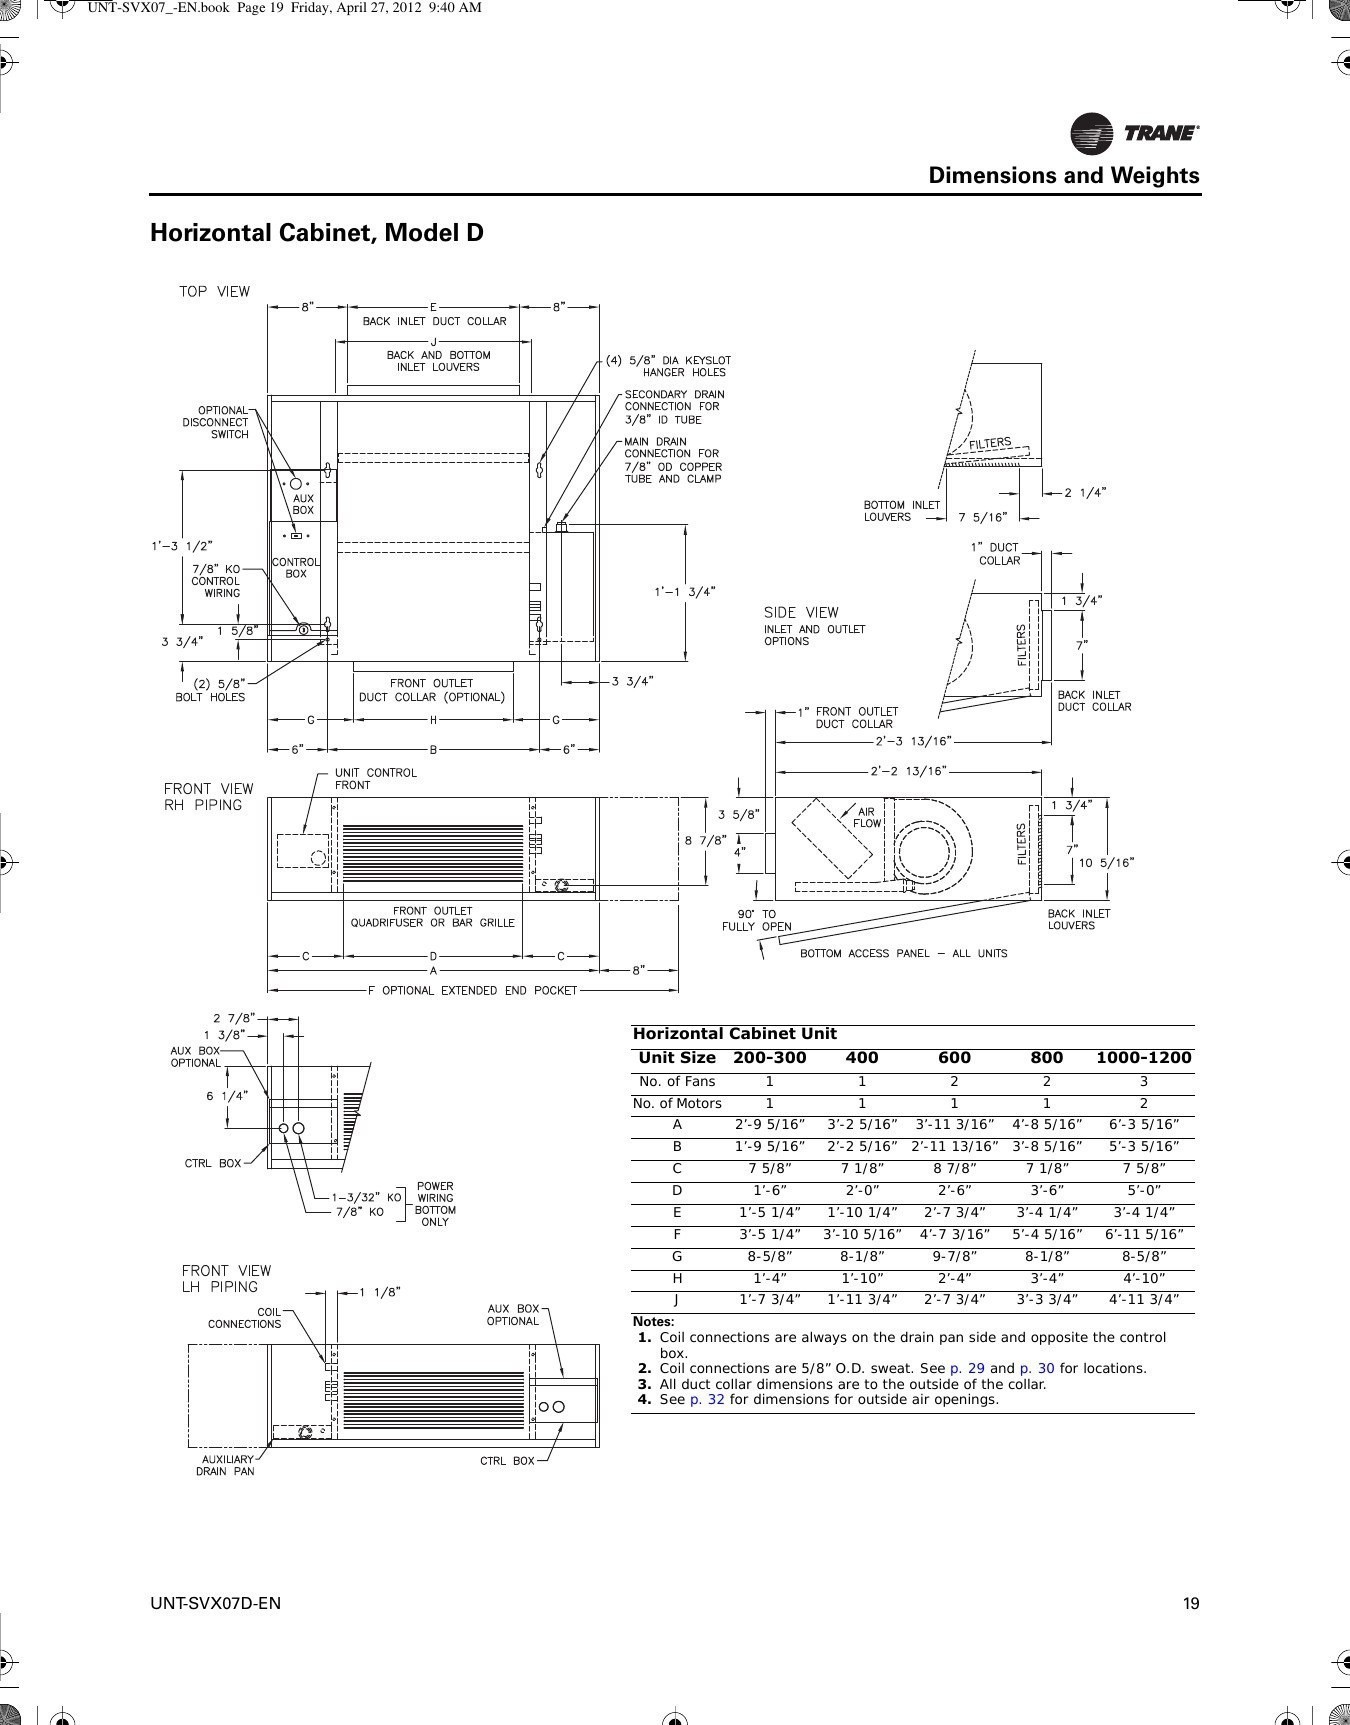 Wiring Diagram Gfci Outlet Fresh Ac Outlet Wiring Diagram New Trane Ac Wiring Diagram Valid